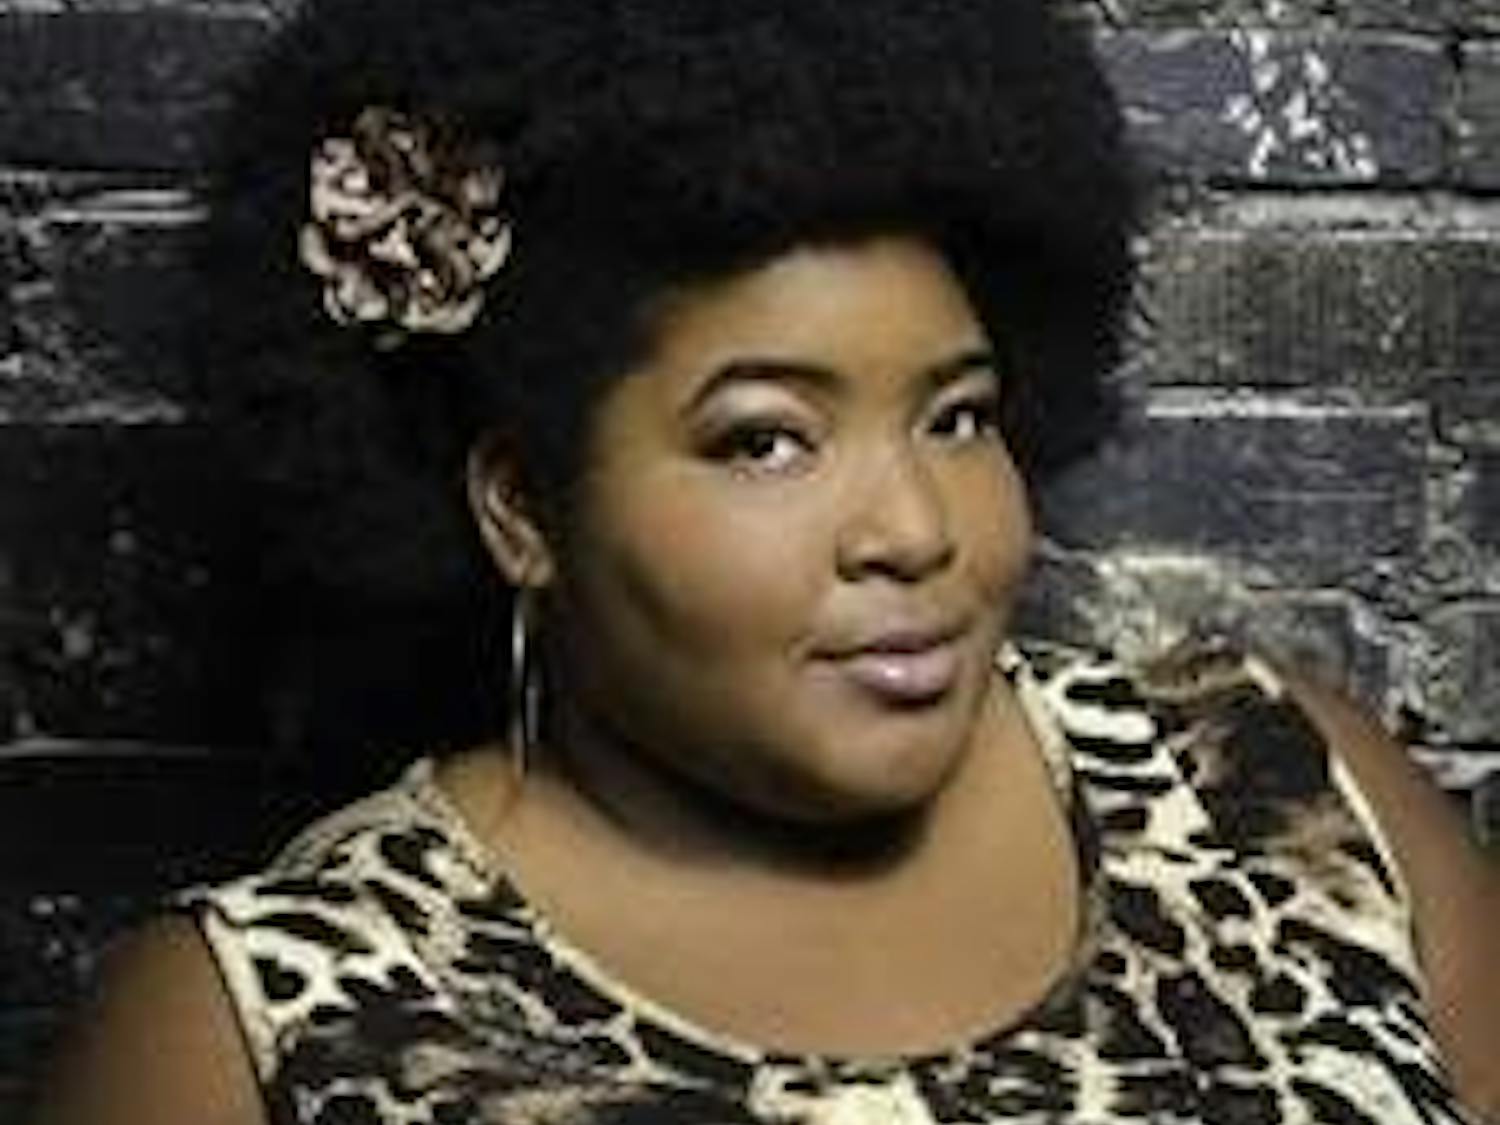 Comedian Dulcé Sloan will be coming to AU on March 24 as part of SUB Madness.